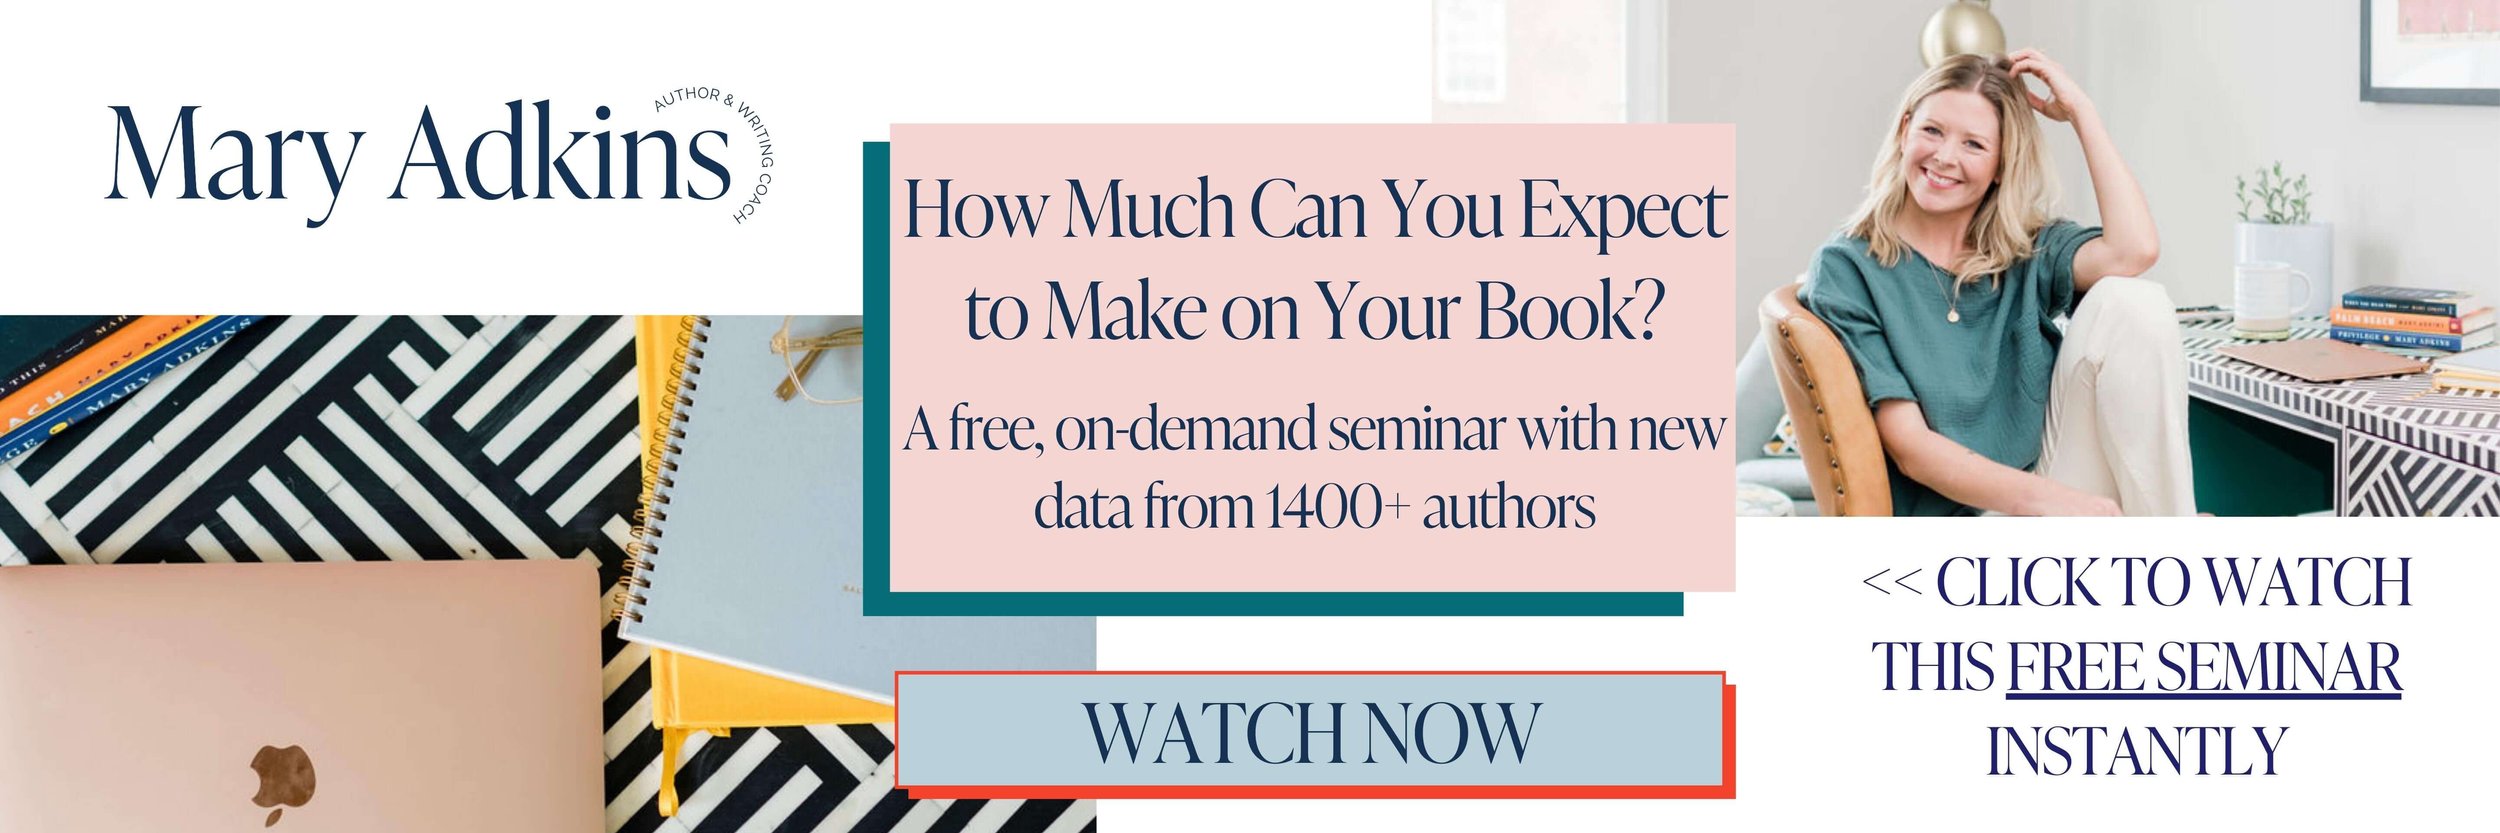 How much can you expect to make on your book?